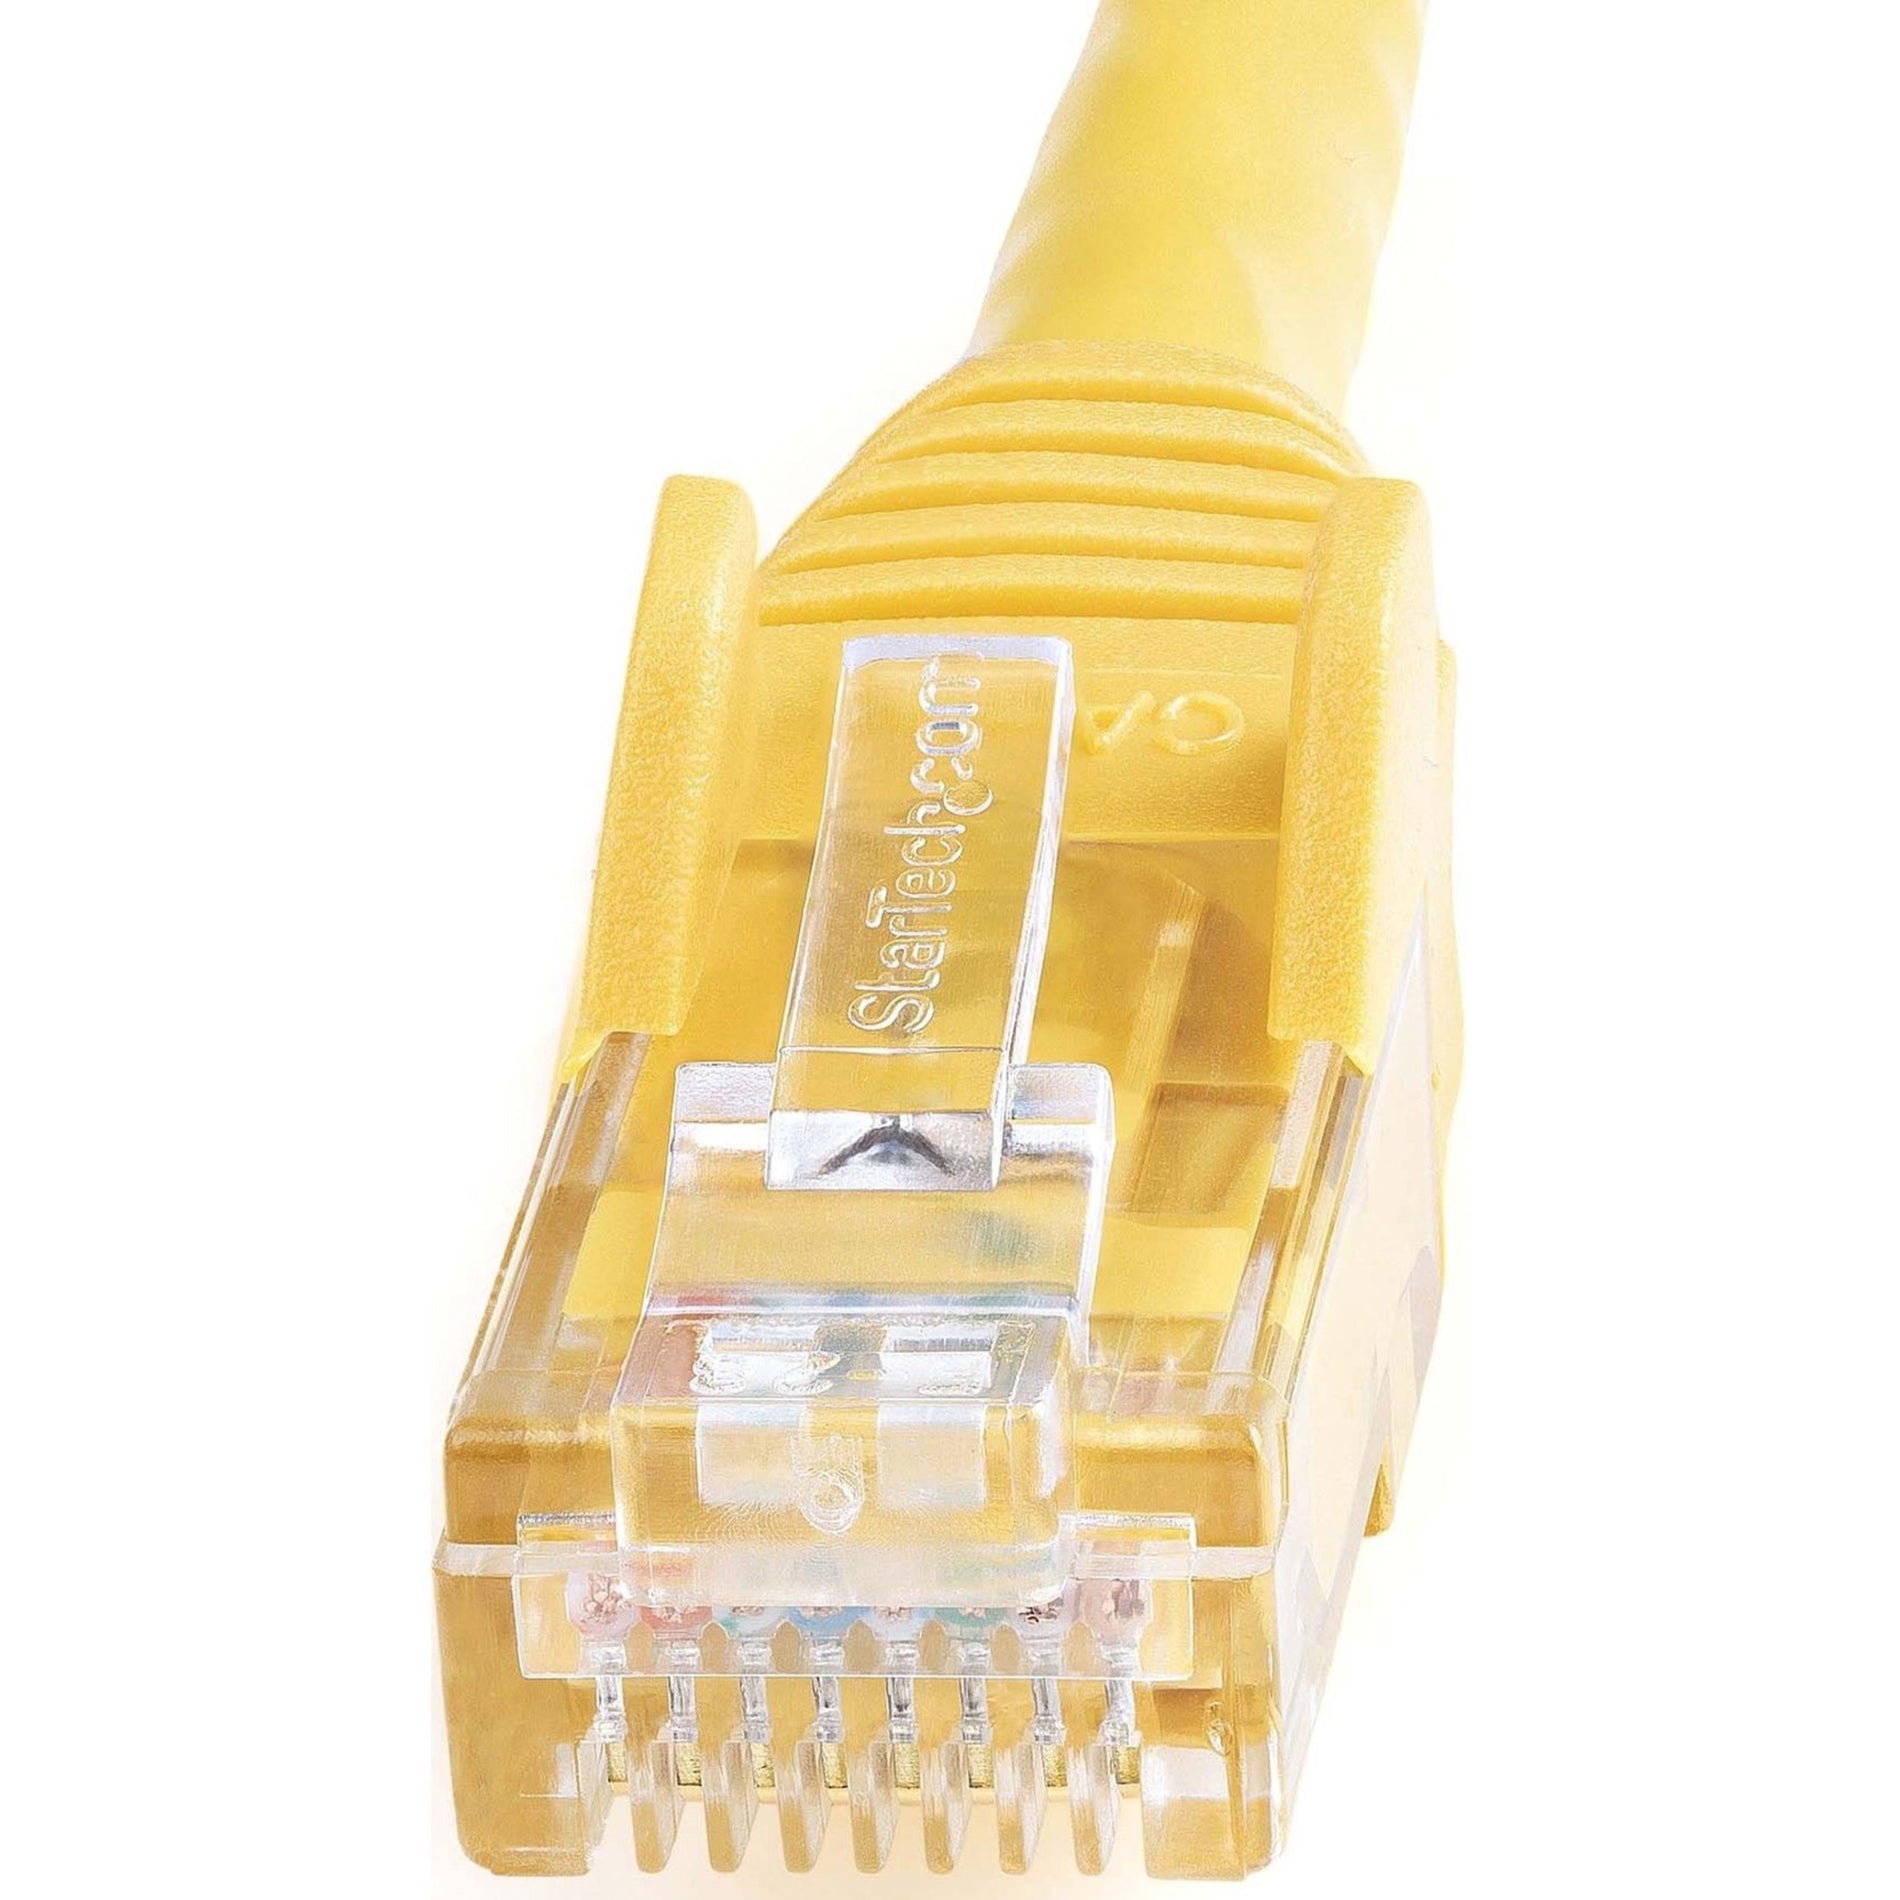 StarTech.com N6PATCH30YL Cat6 Patch Cable, 30ft Yellow Ethernet Cable, Snagless RJ45 Connectors